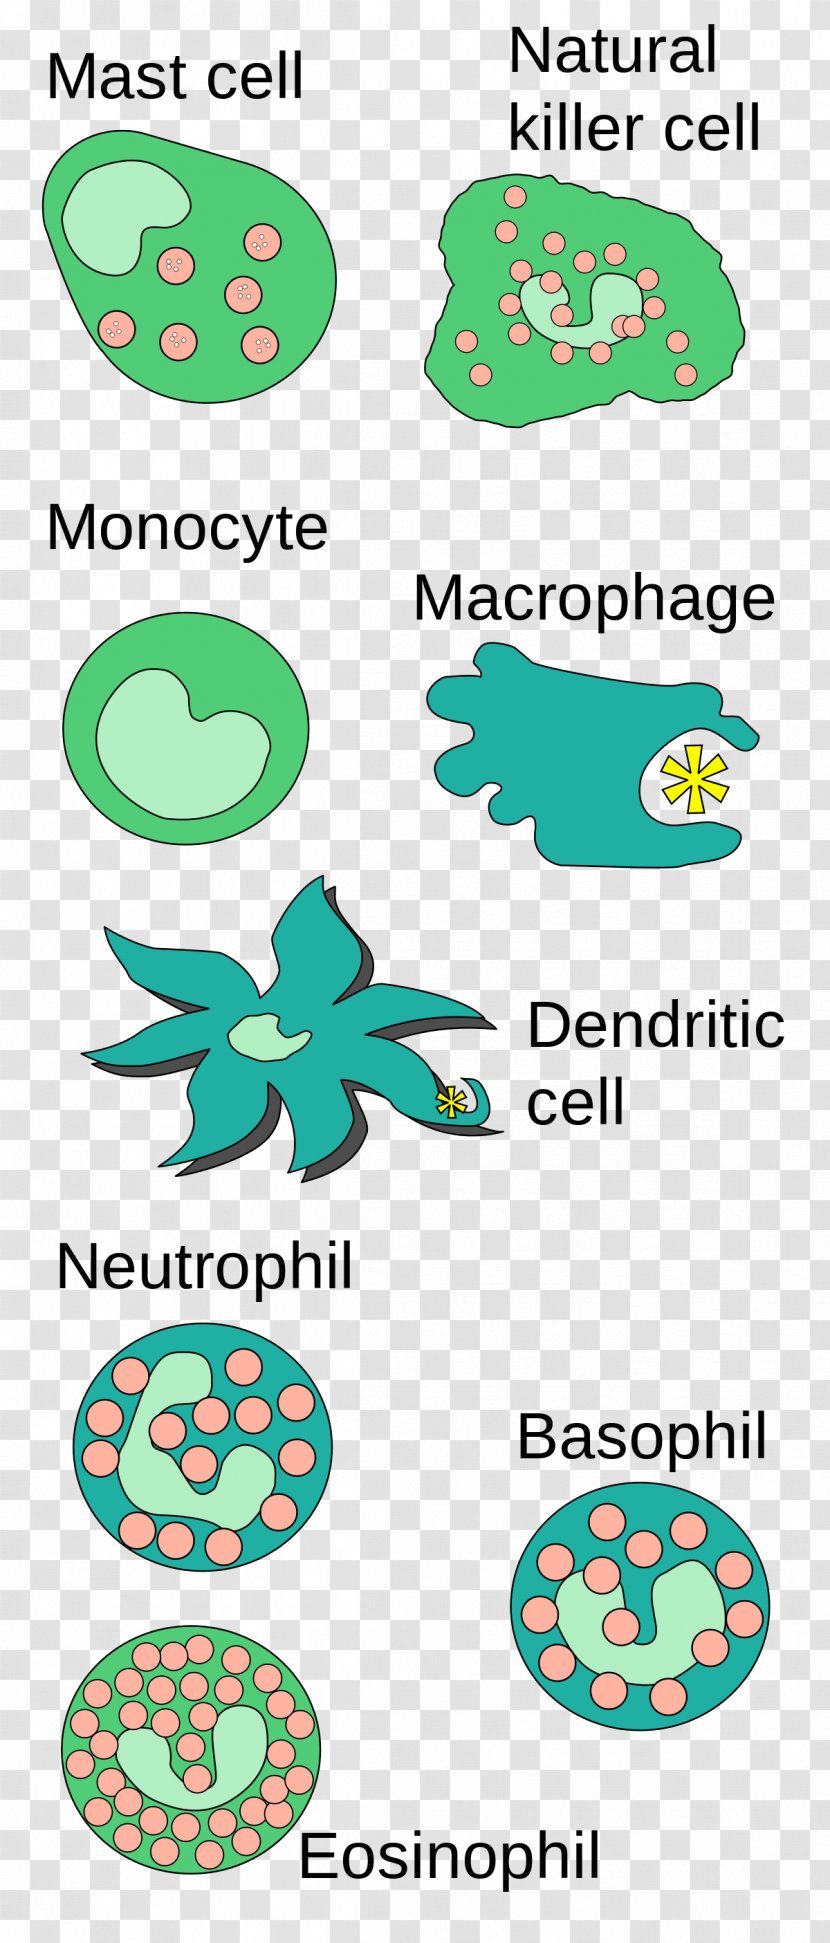 Innate Immune System Mast Cell Immunology - Green Transparent PNG